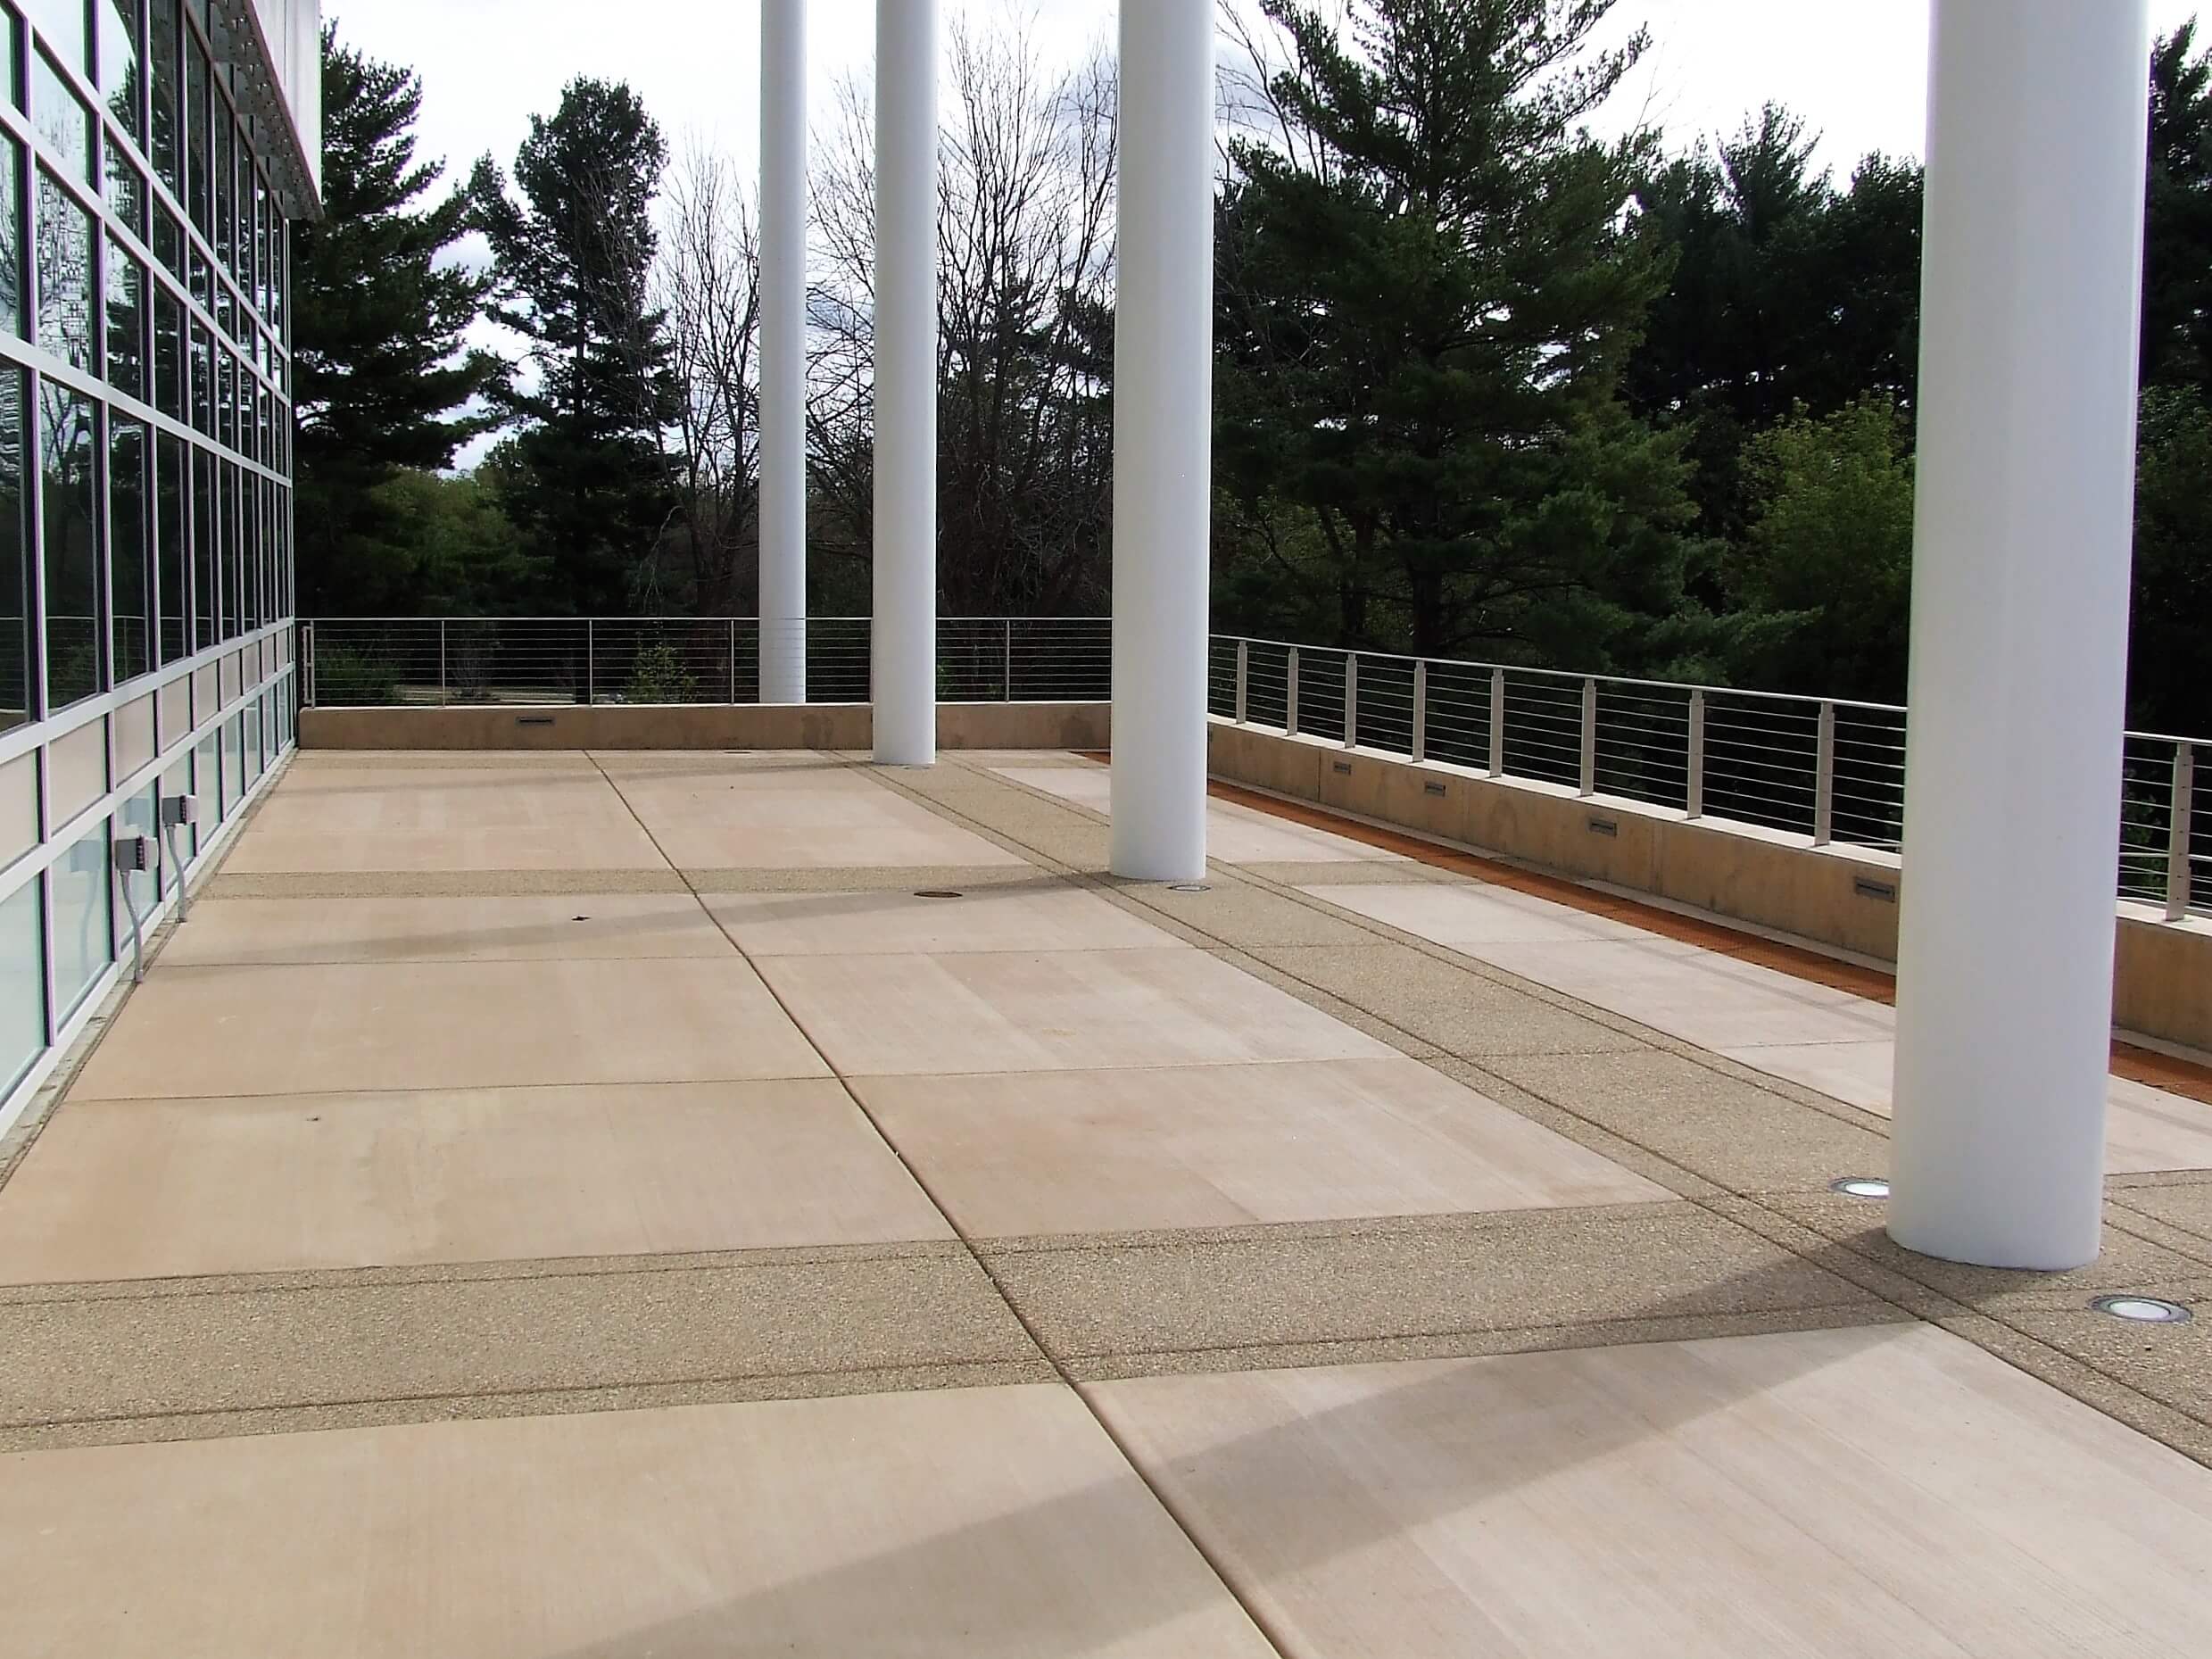 View of Rock Valley College entrance, IL, Core mounted posts, KOTO guardrail